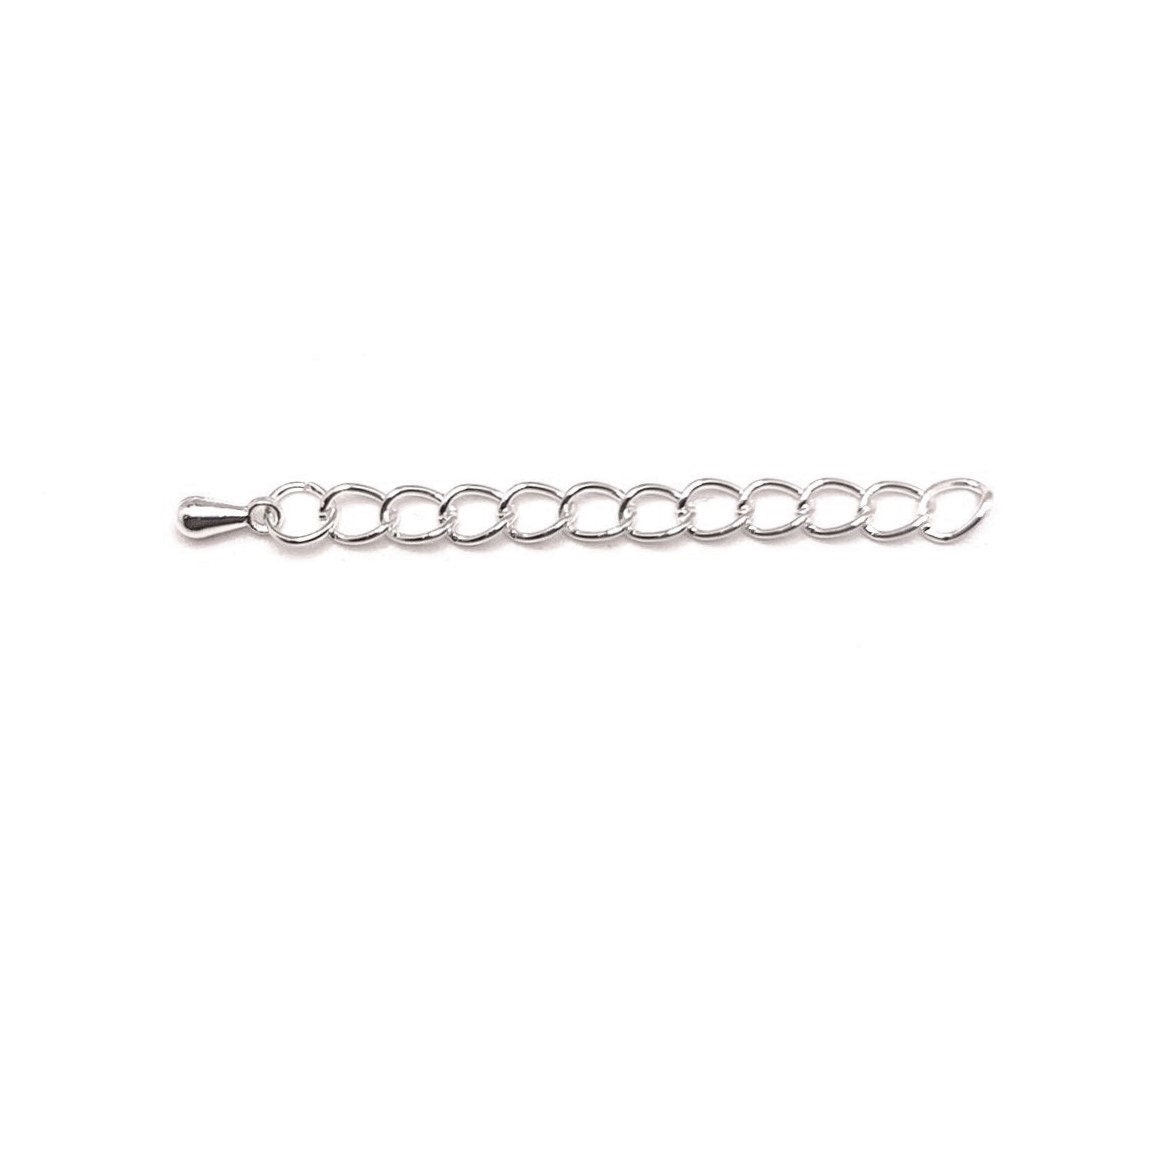 BULK 20 Stainless Steel Extender Silver Tone Link 2 Chains F420 